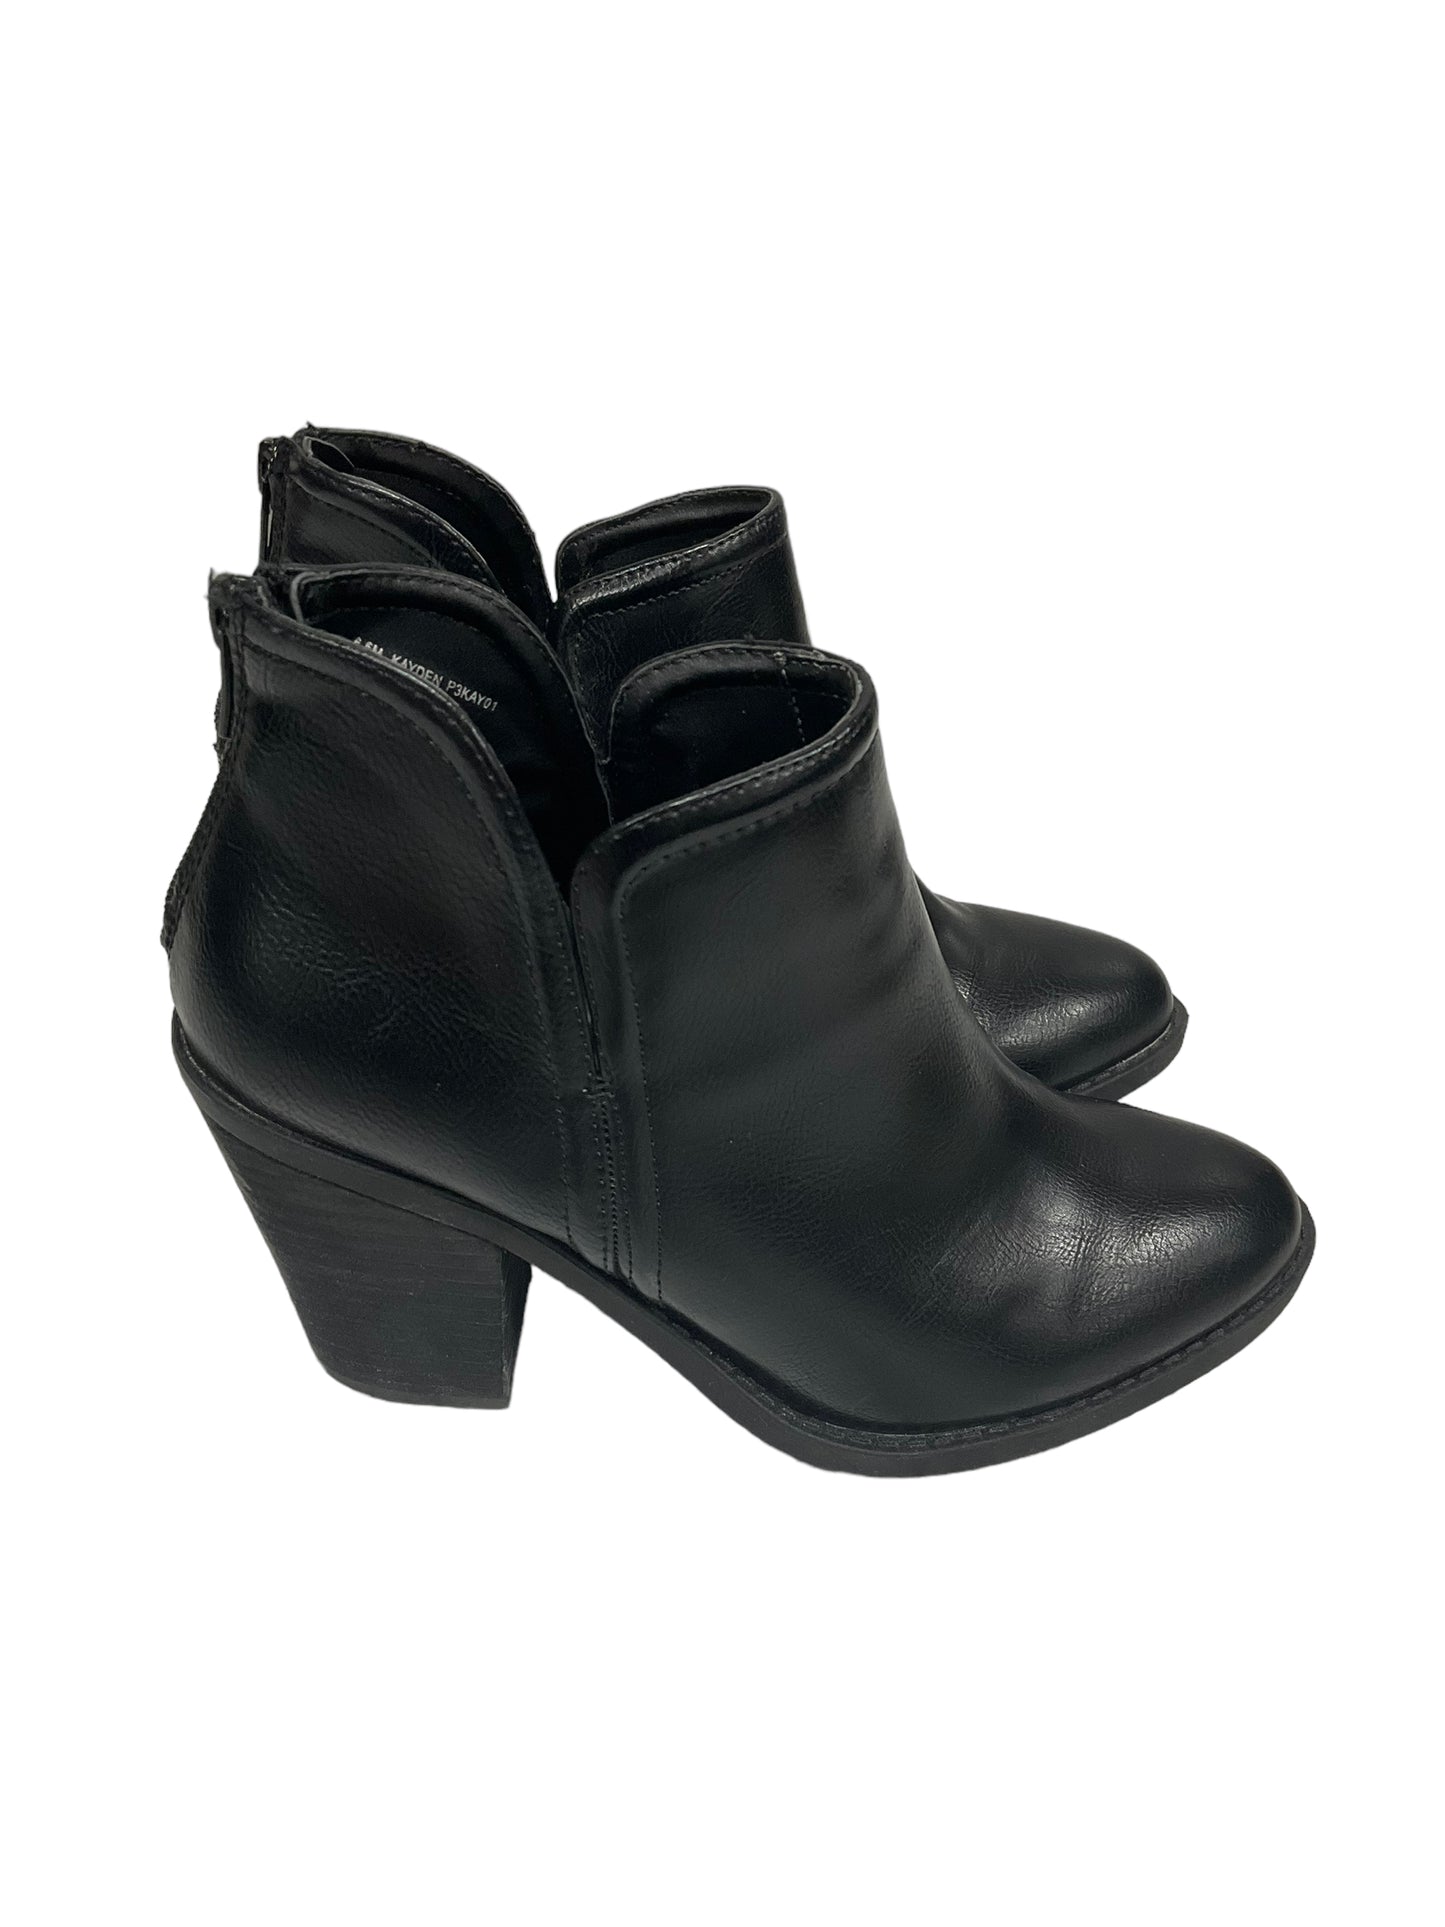 Boots Ankle Heels By Joie  Size: 10